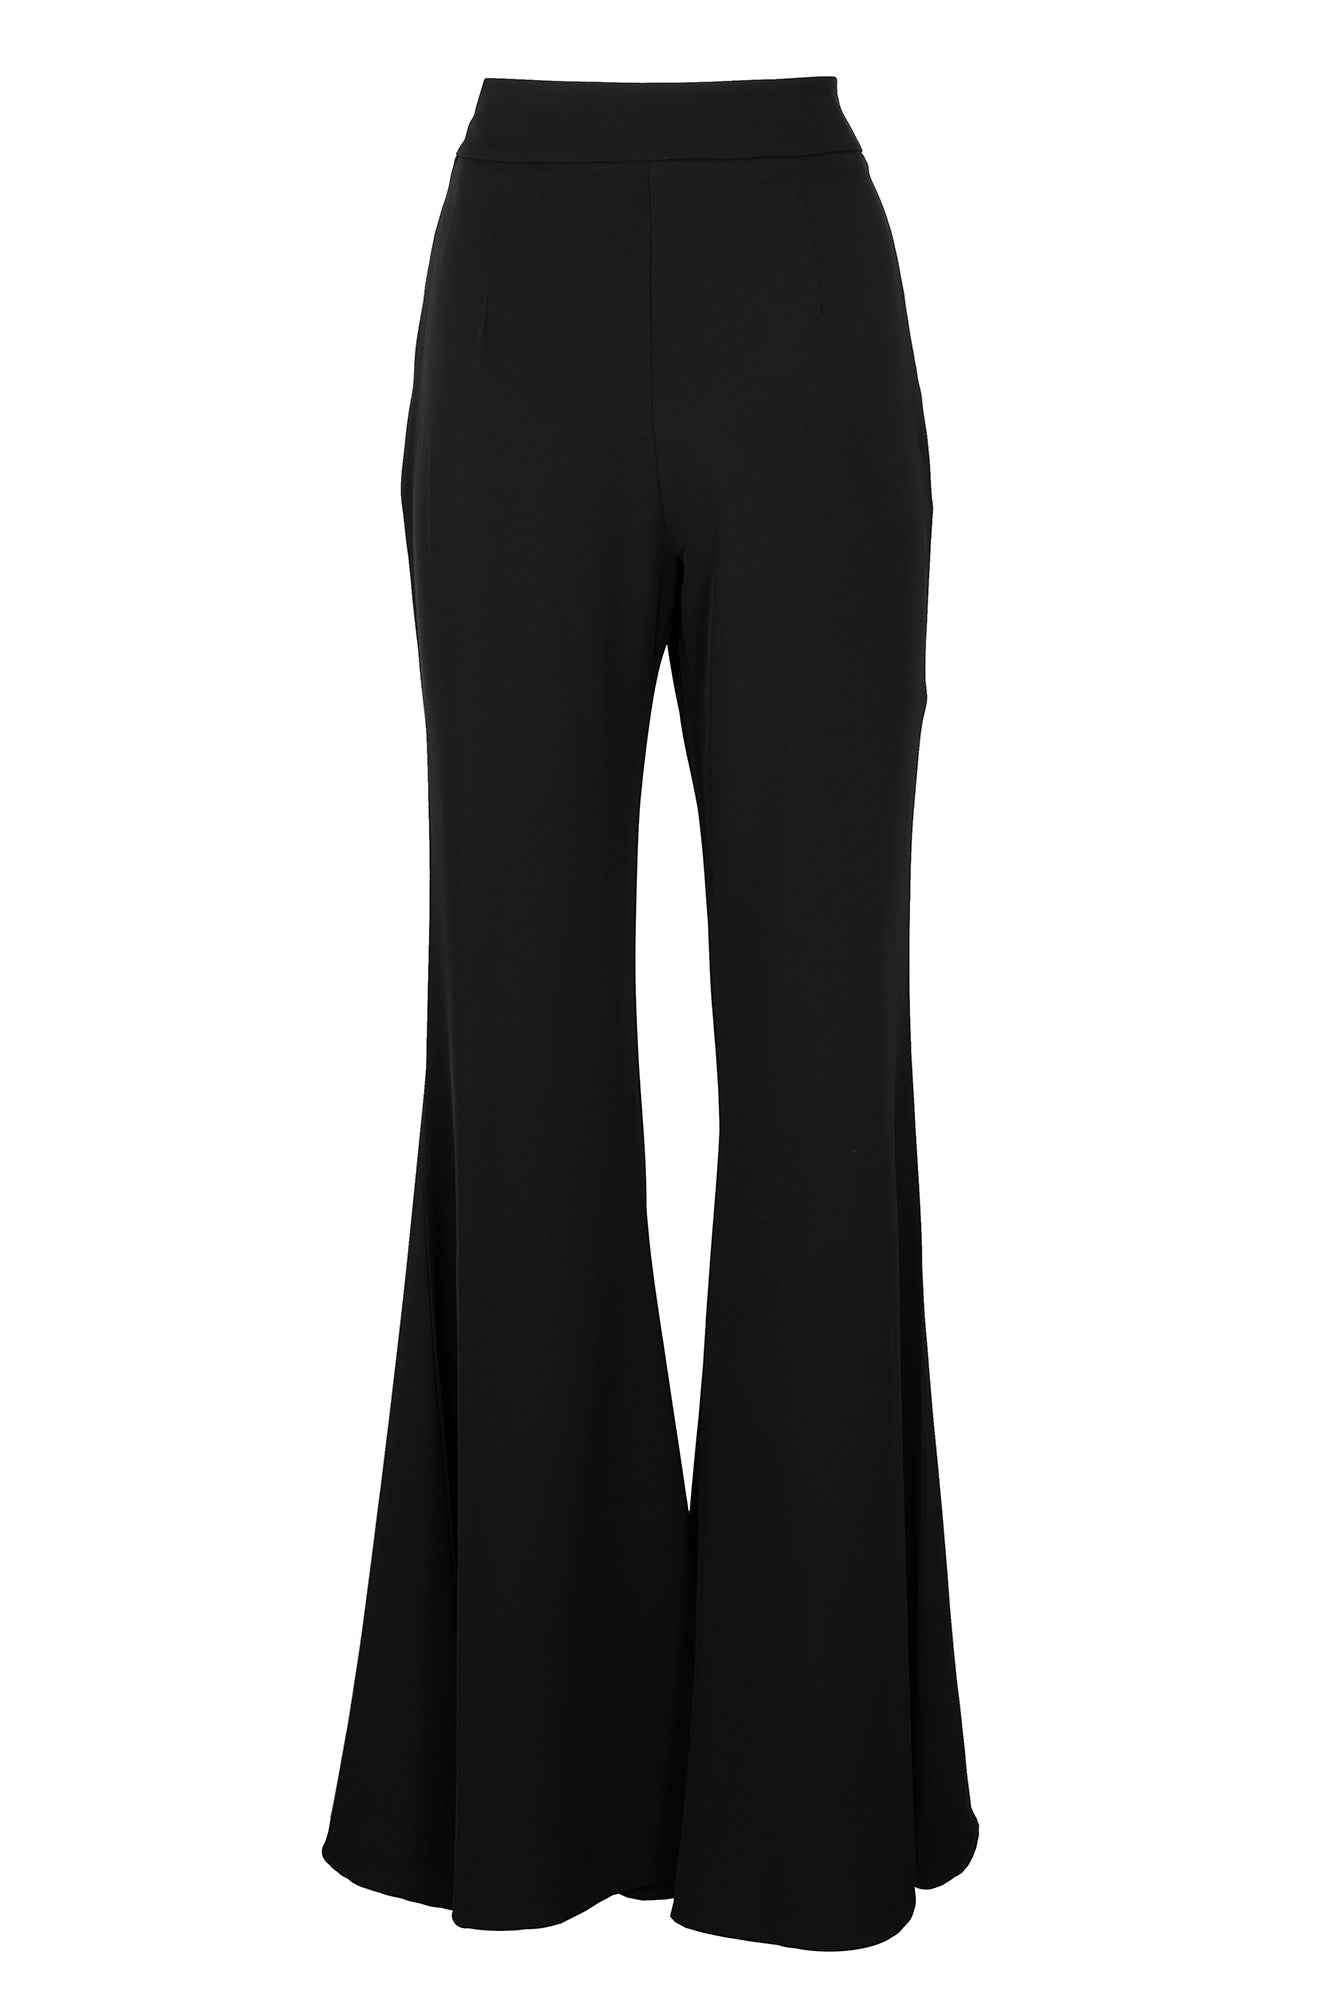 Fluid fabric trousers in black